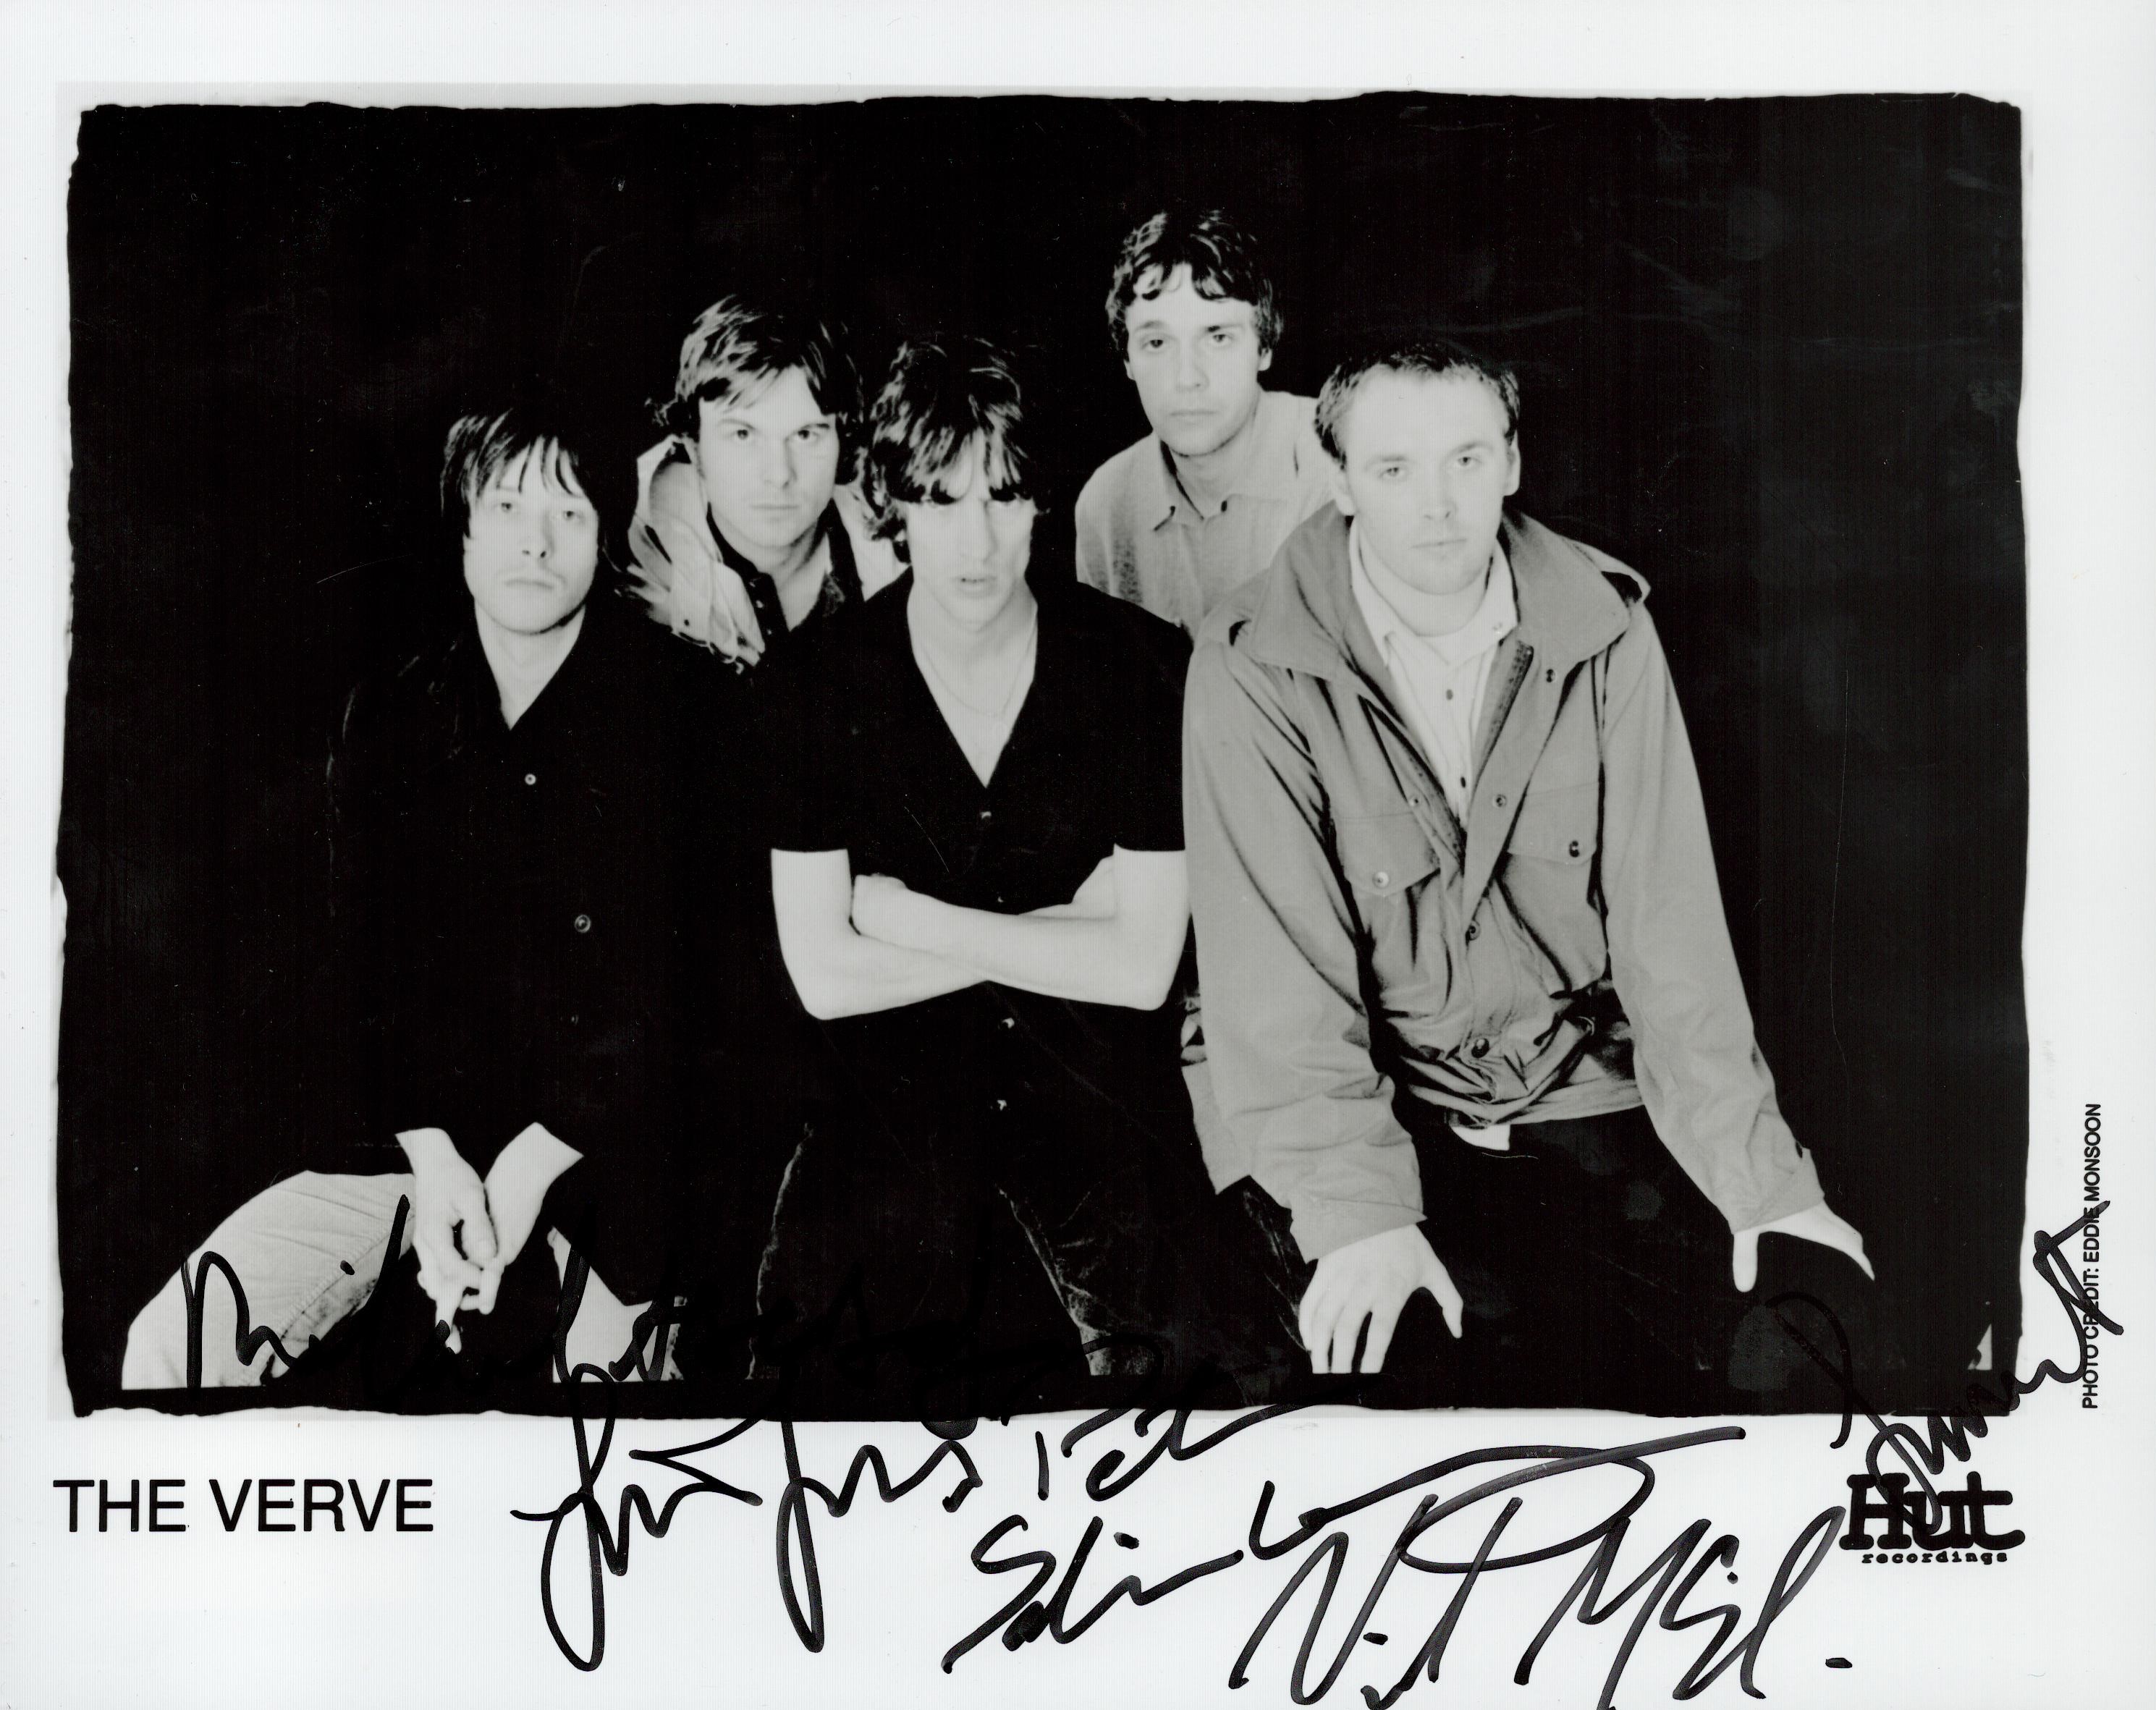 The Verve multi signed 10x8 black and white promo photo includes all five band members Richard